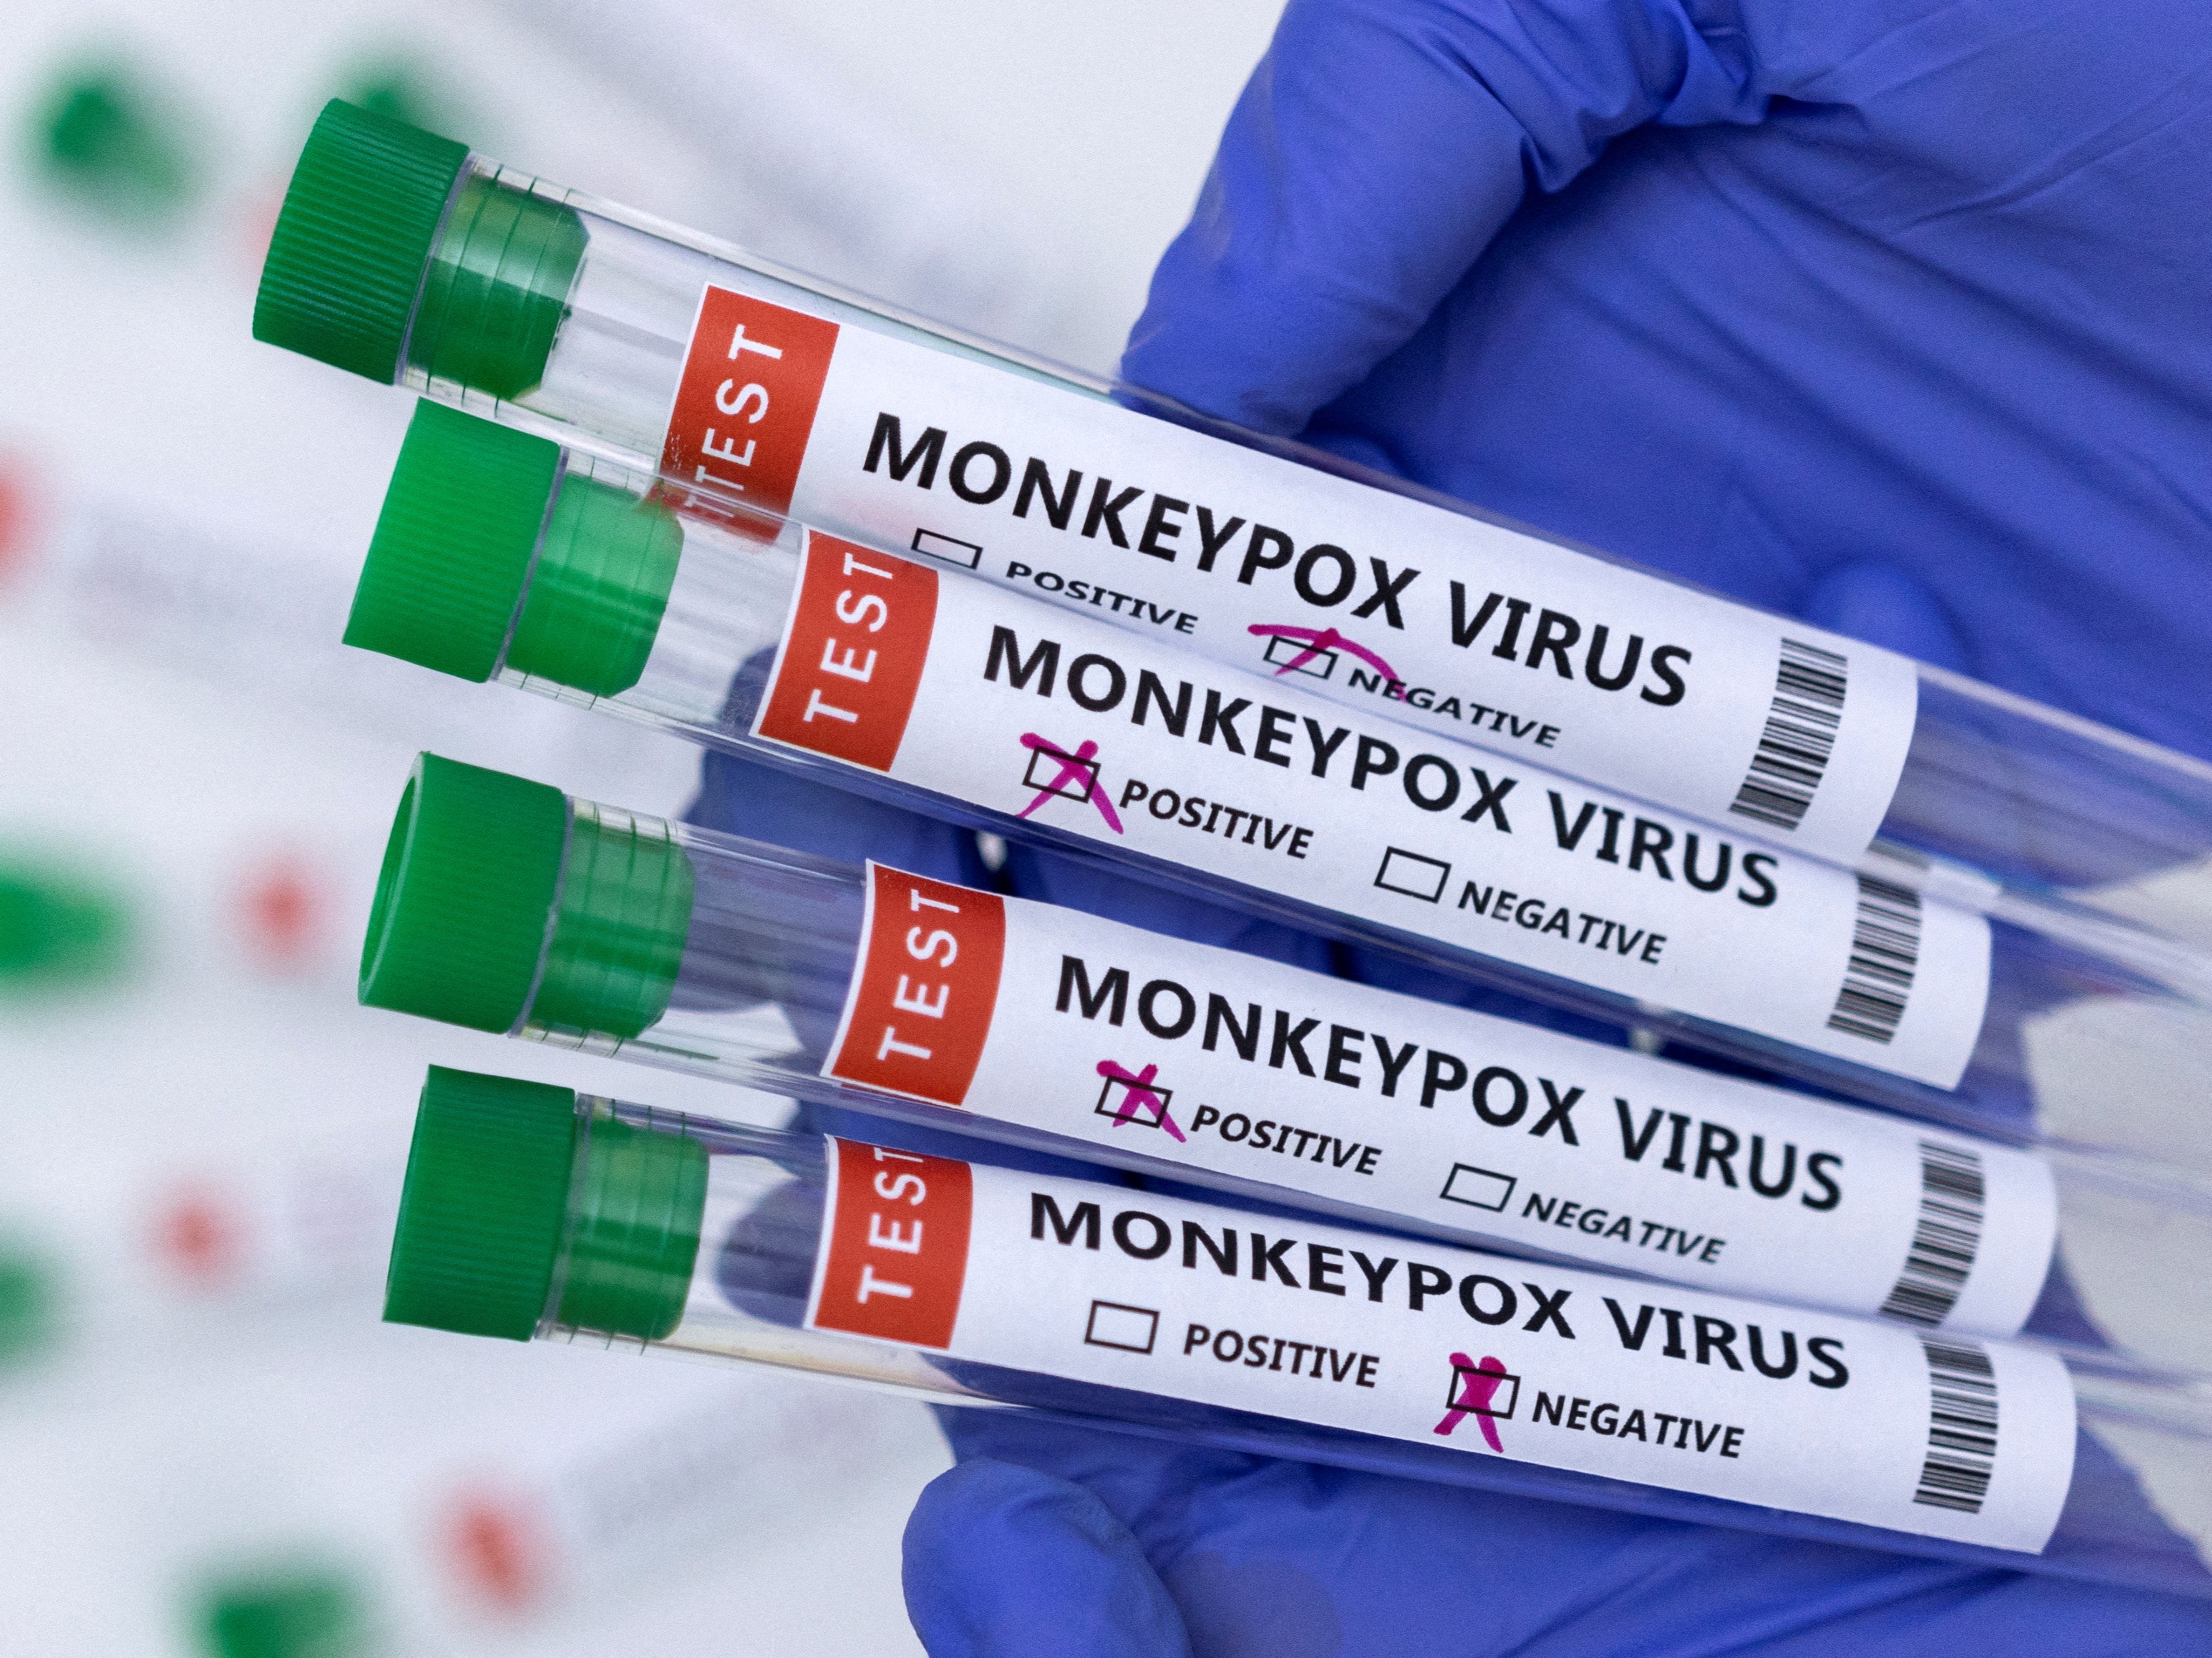 Test tubes labelled “Monkeypox virus positive and negative” are seen in this illustration taken May 23, 2022